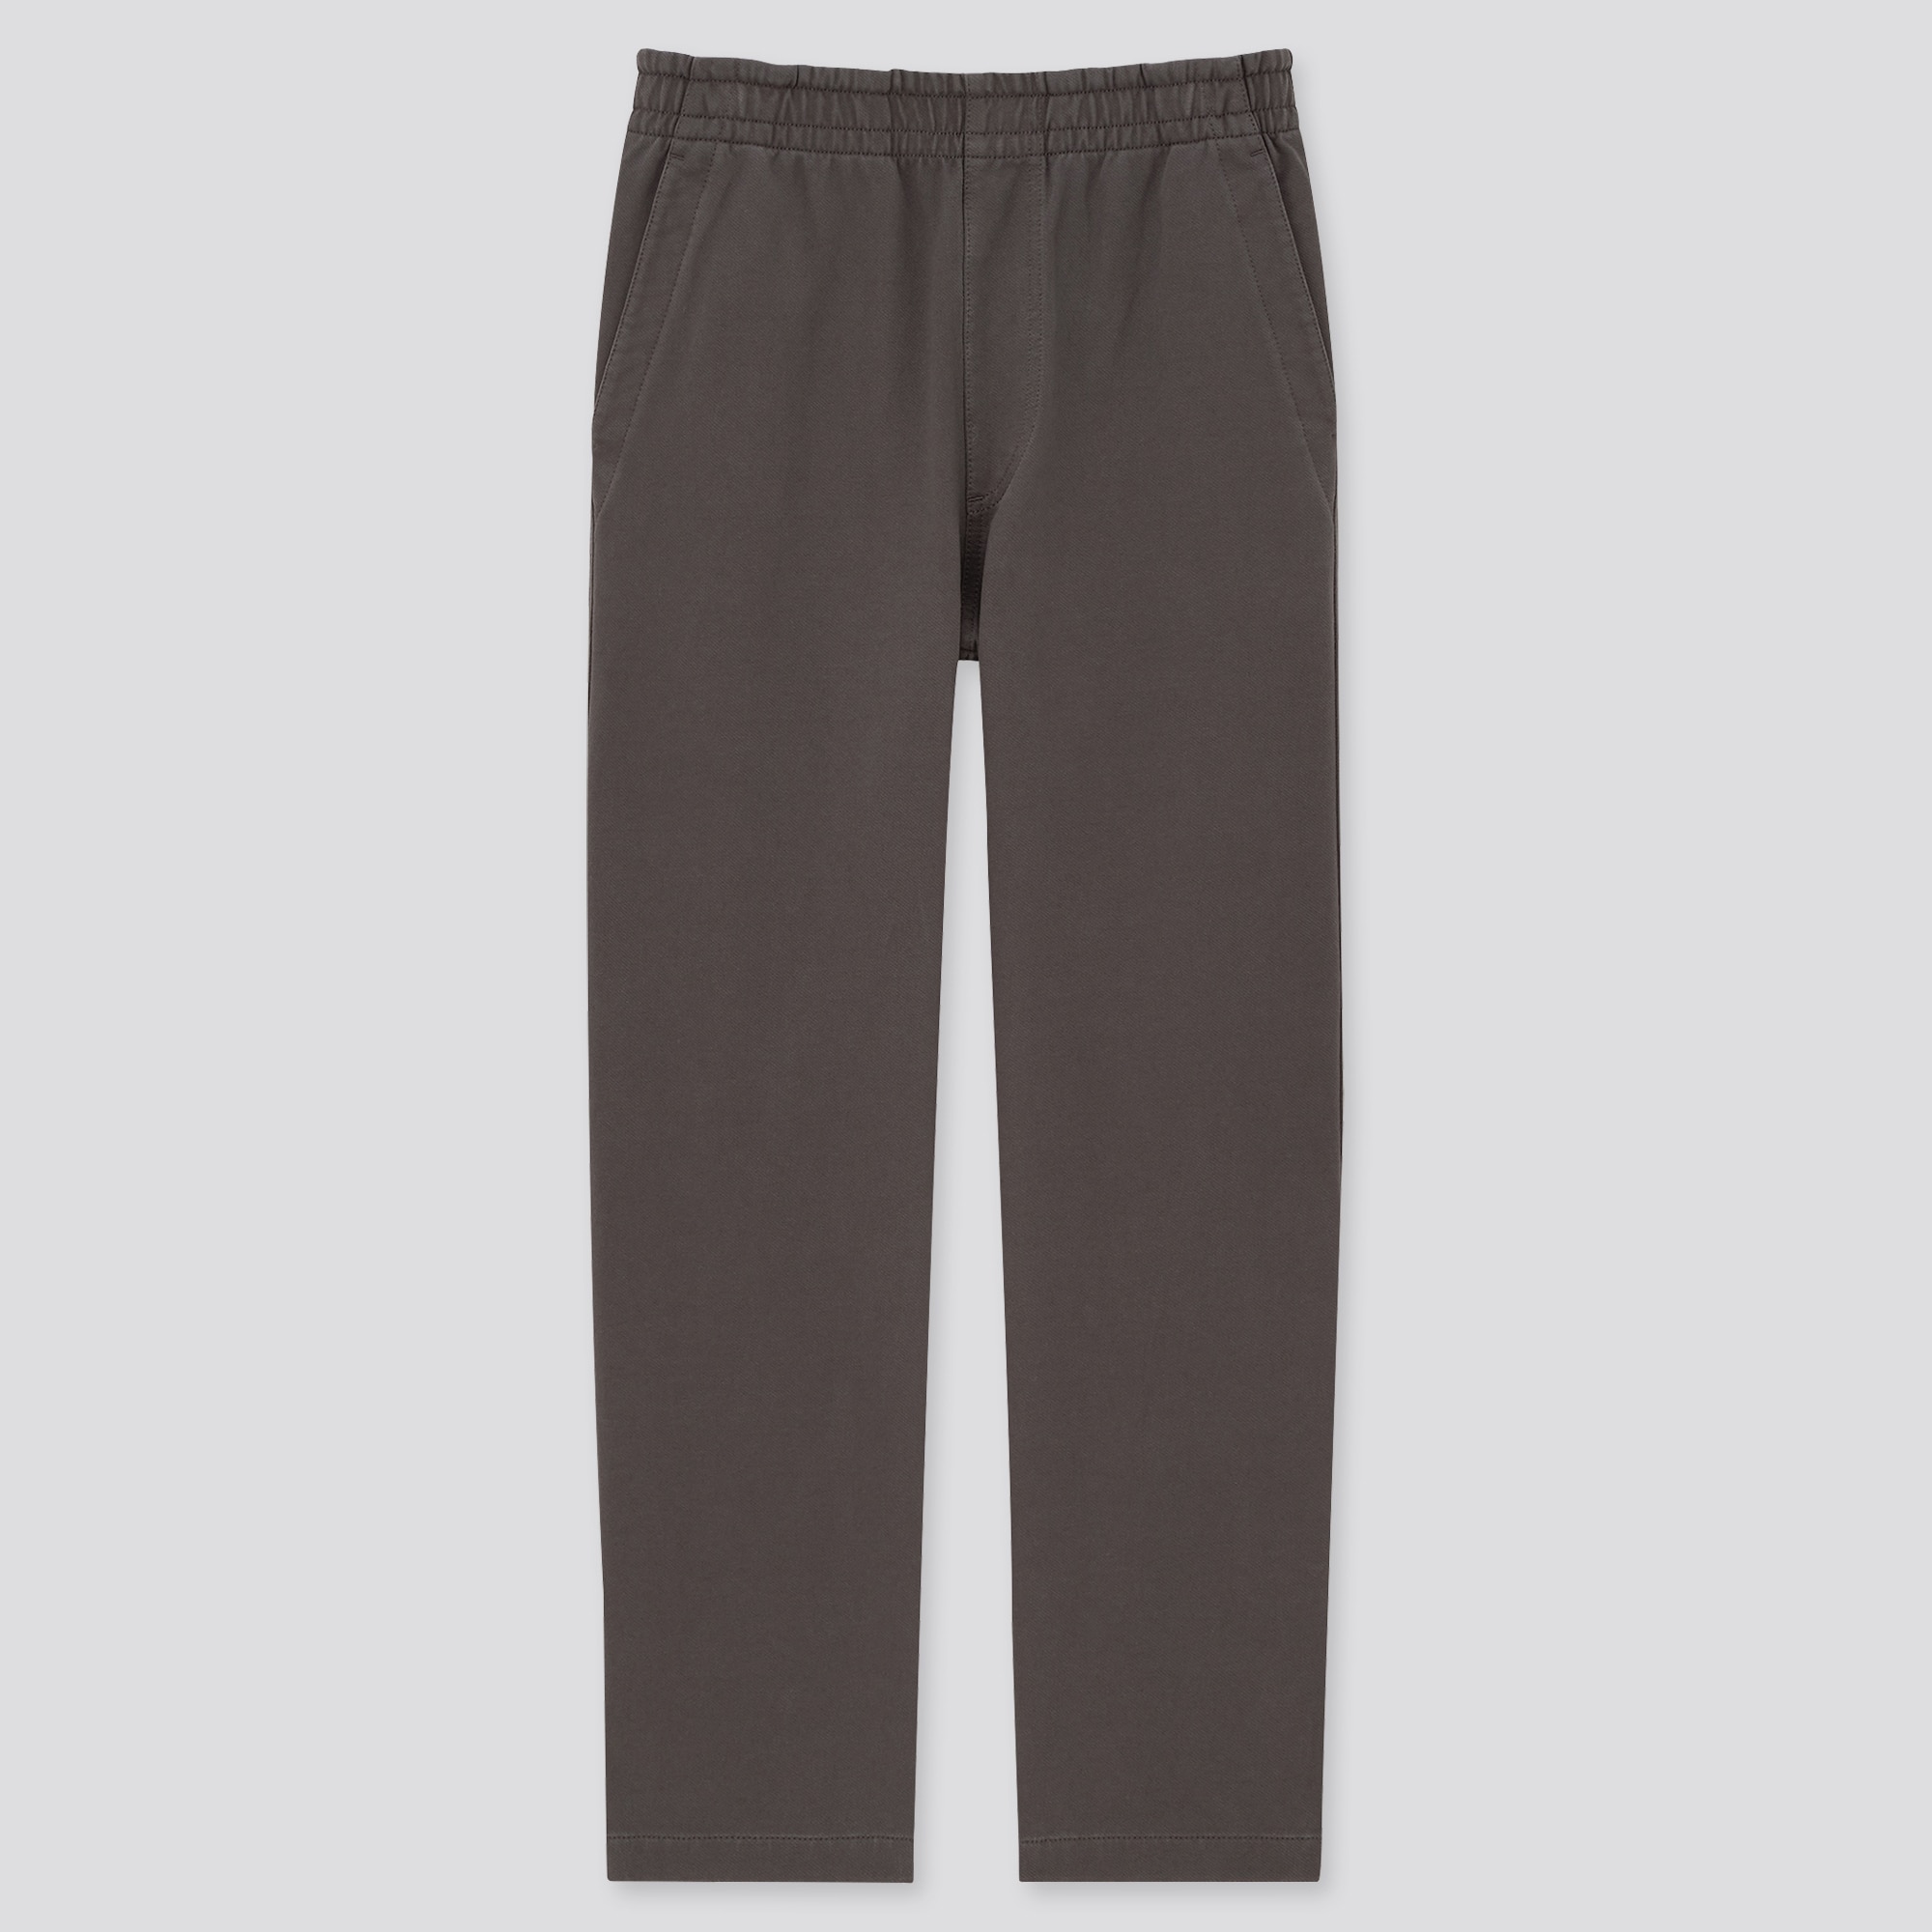 washed jersey ankle pants uniqlo